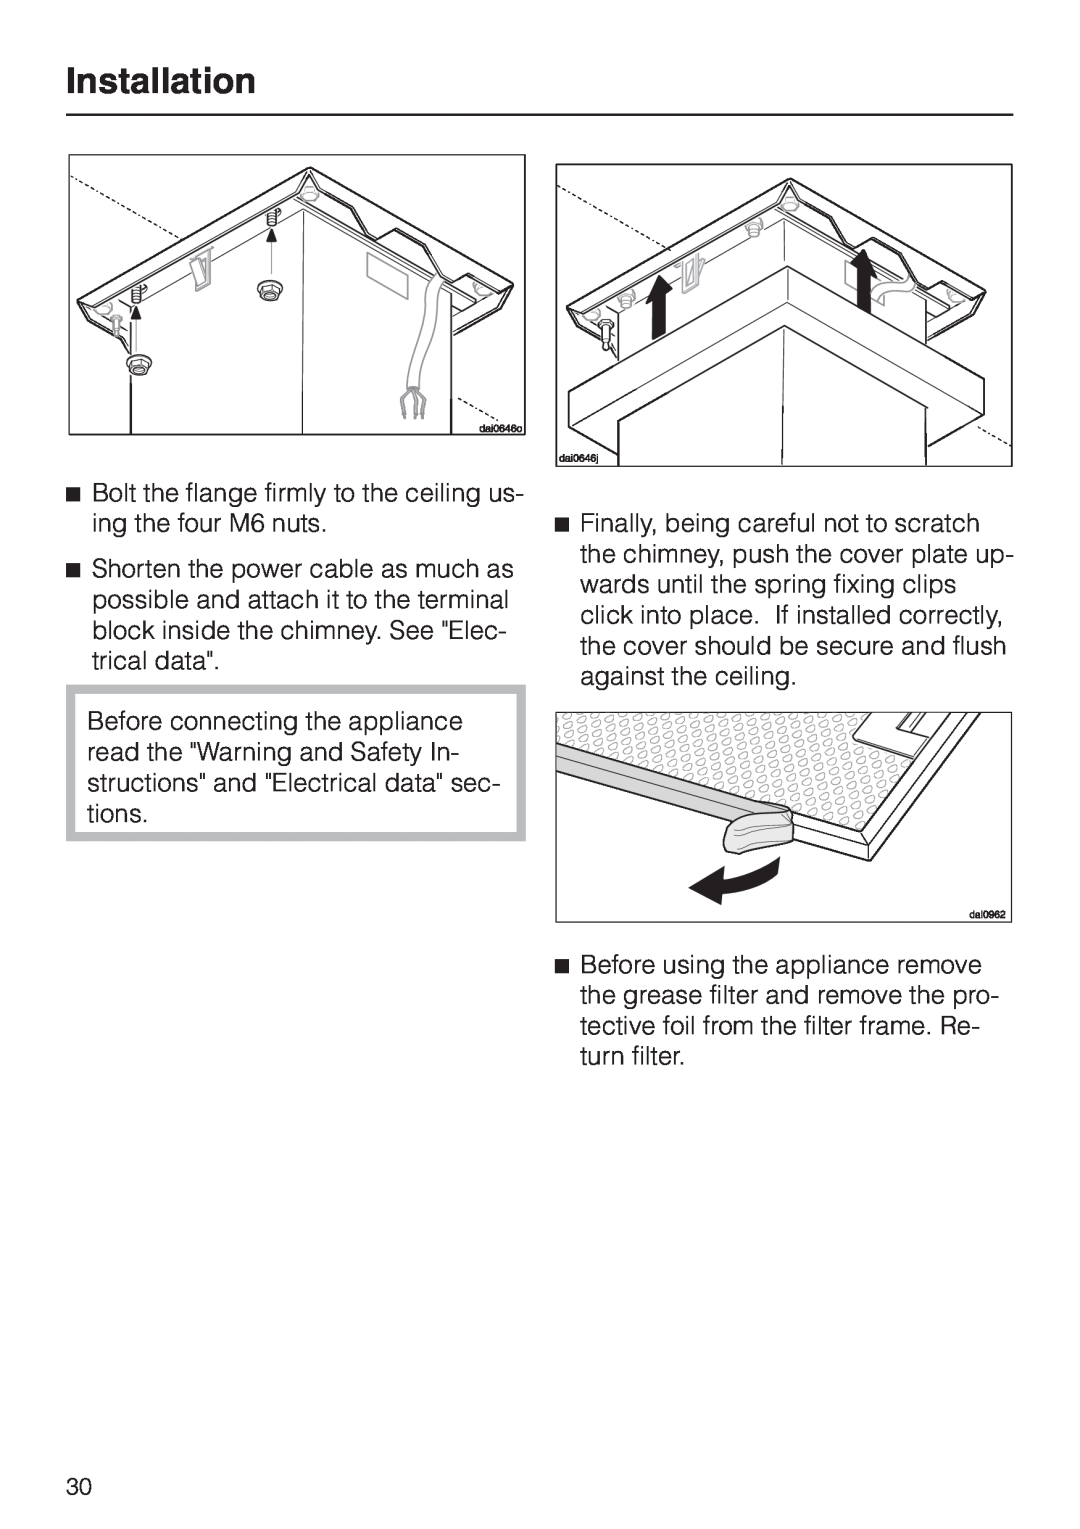 Miele DA210-3 installation instructions Installation, Bolt the flange firmly to the ceiling us- ing the four M6 nuts 